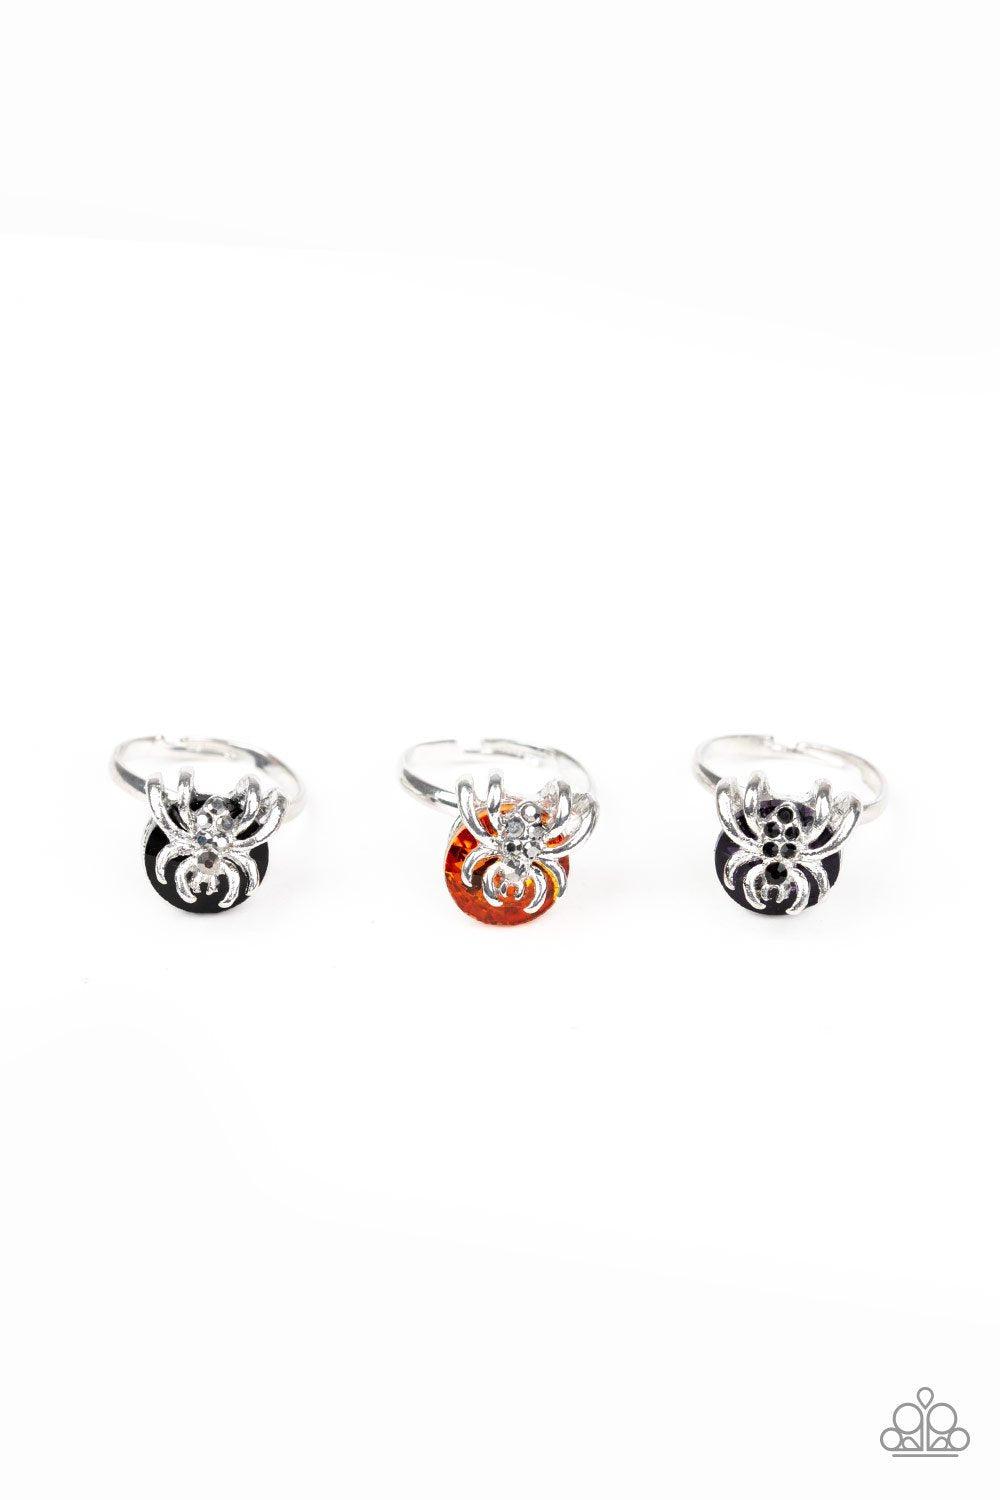 Halloween Themed Starlet Shimmer Children's Spider Gem Rings (2020) - Paparazzi Accessories (set of 5)-CarasShop.com - $5 Jewelry by Cara Jewels